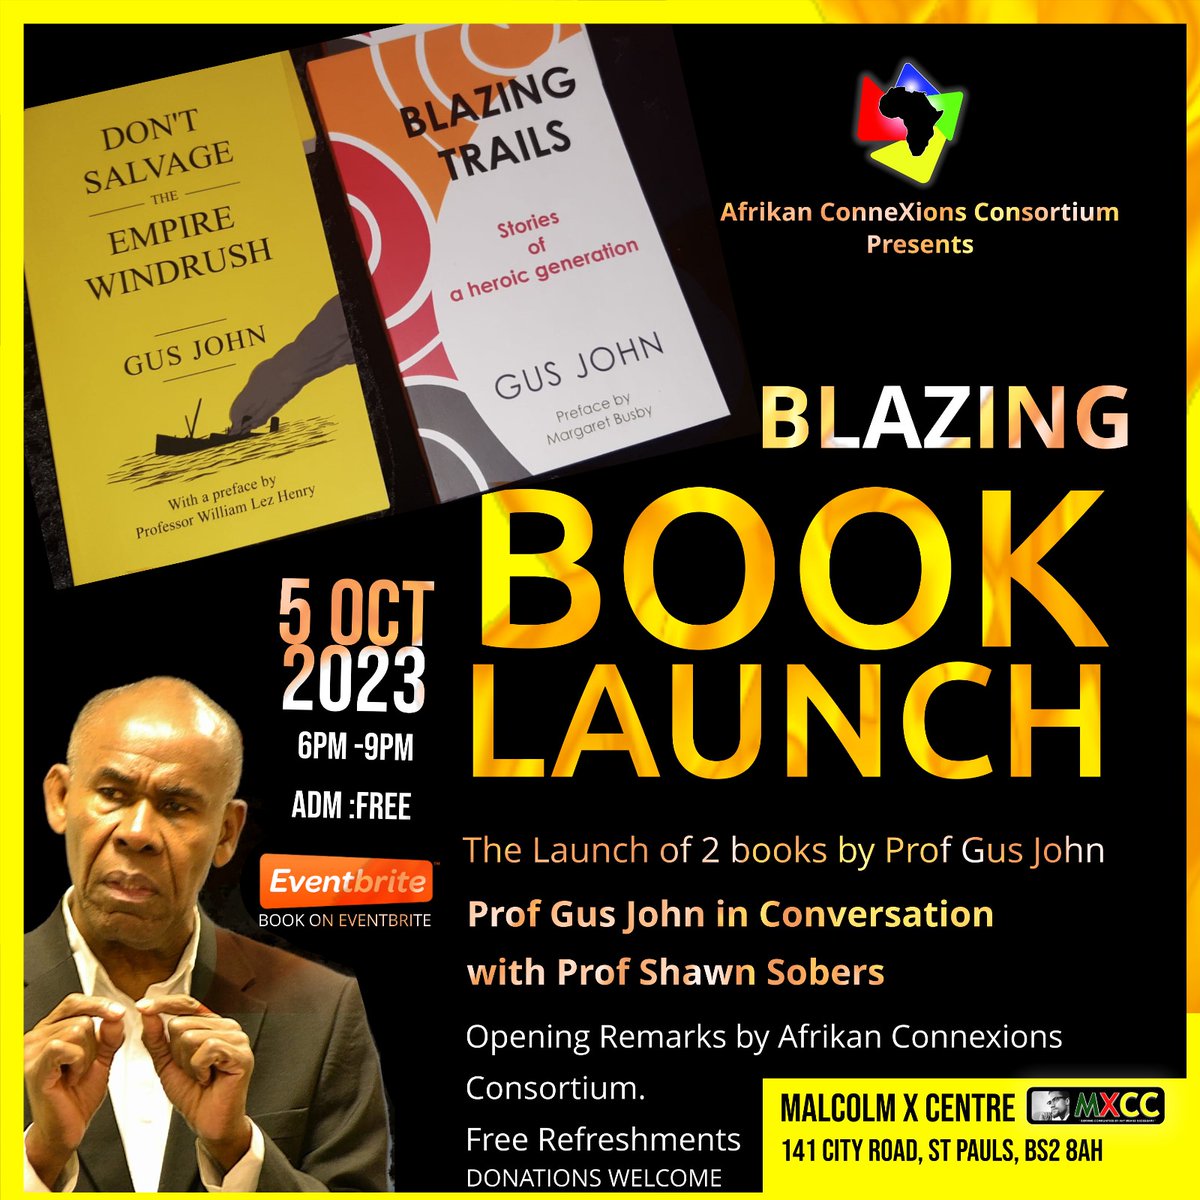 Save the date! Thurs 5th Oct 6pm at the @MXCCBristol. @AfrikanConneX brings you this #Blazing #BookLaunch of 2 books by @profgusjohn who will be in conversation with Prof @shawnsobers We will also introduce you to the vision for #ZenzeleVillage More info on @eventbrite #BHM RT